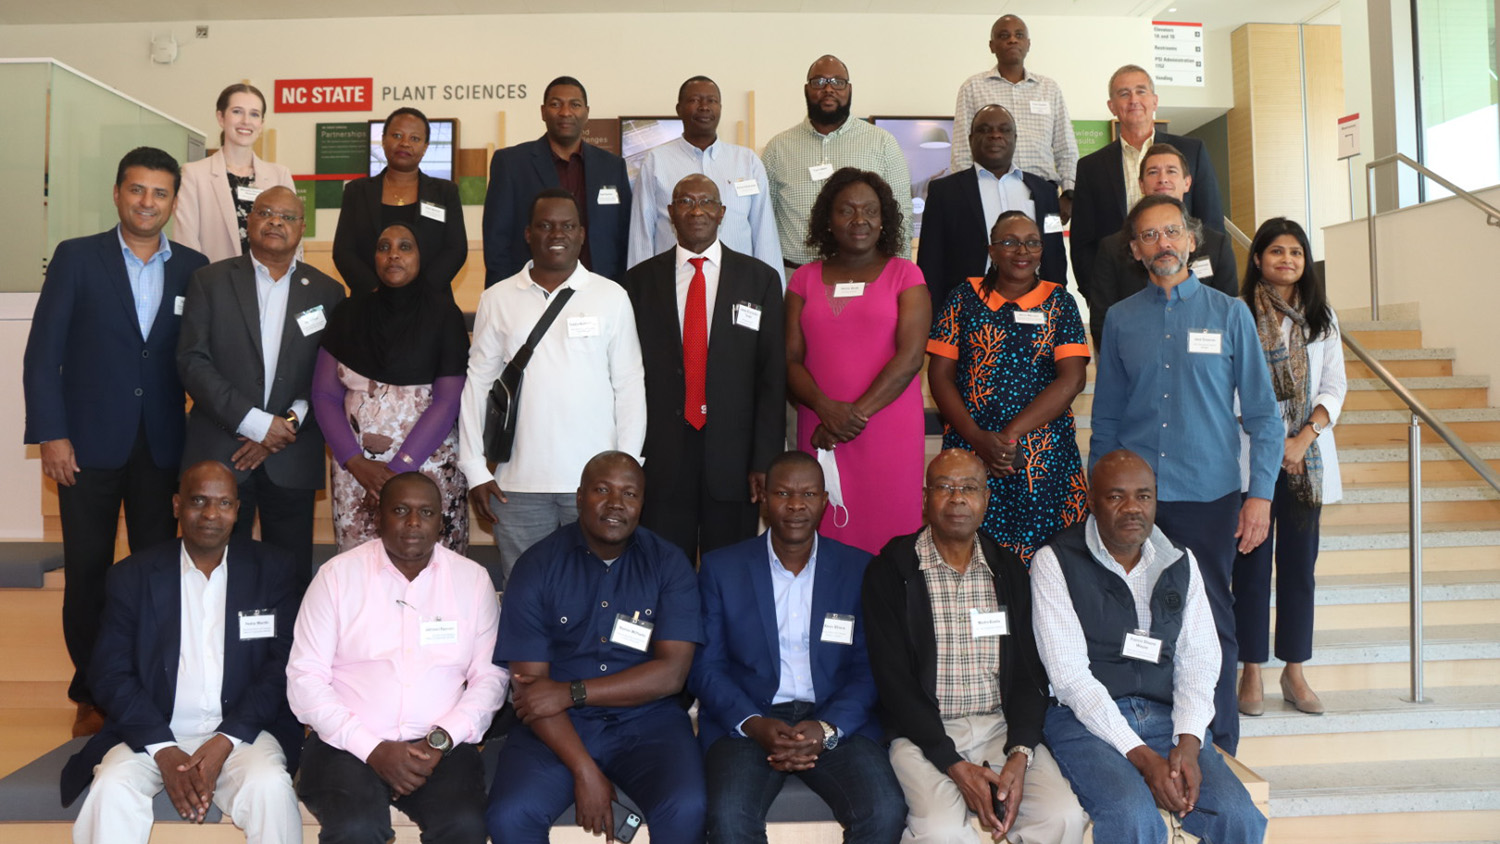 Global One Health Academy symposium participants